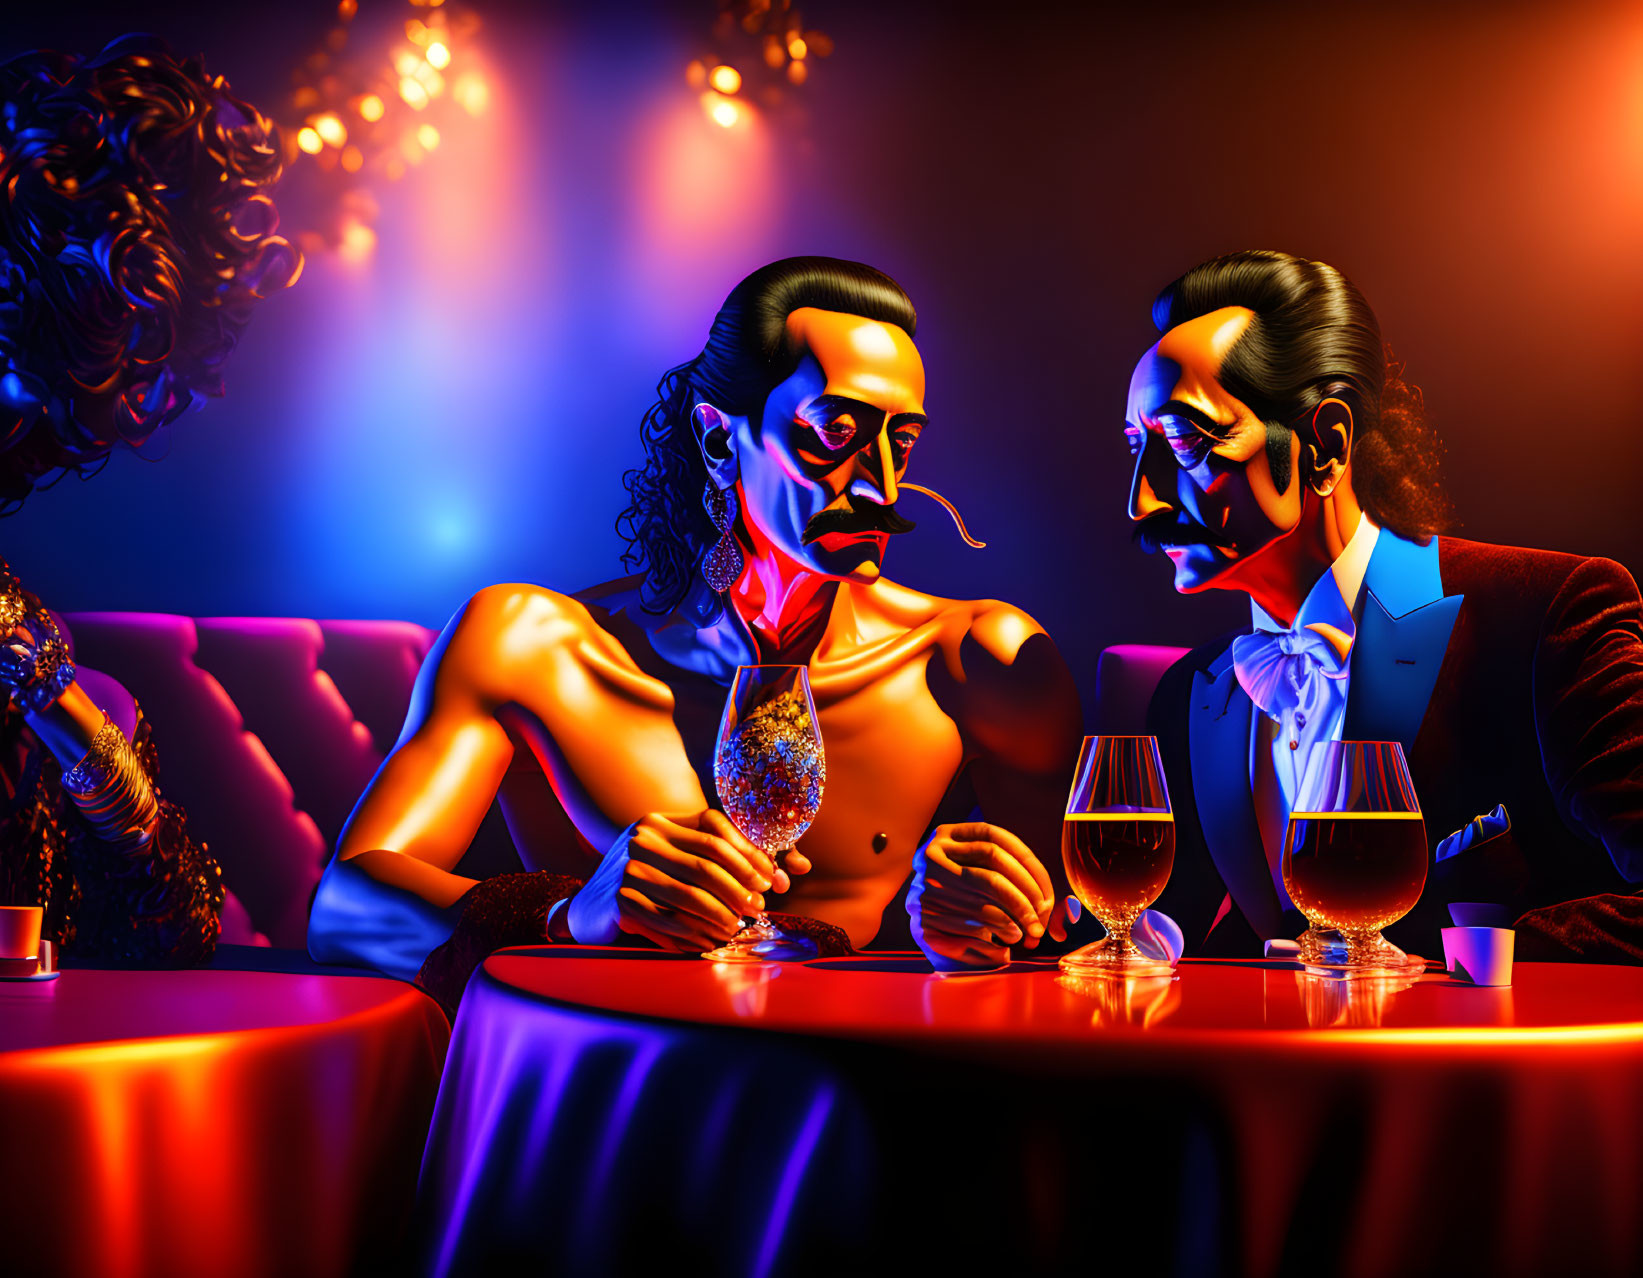 Stylized figures with face paint in vibrant bar setting